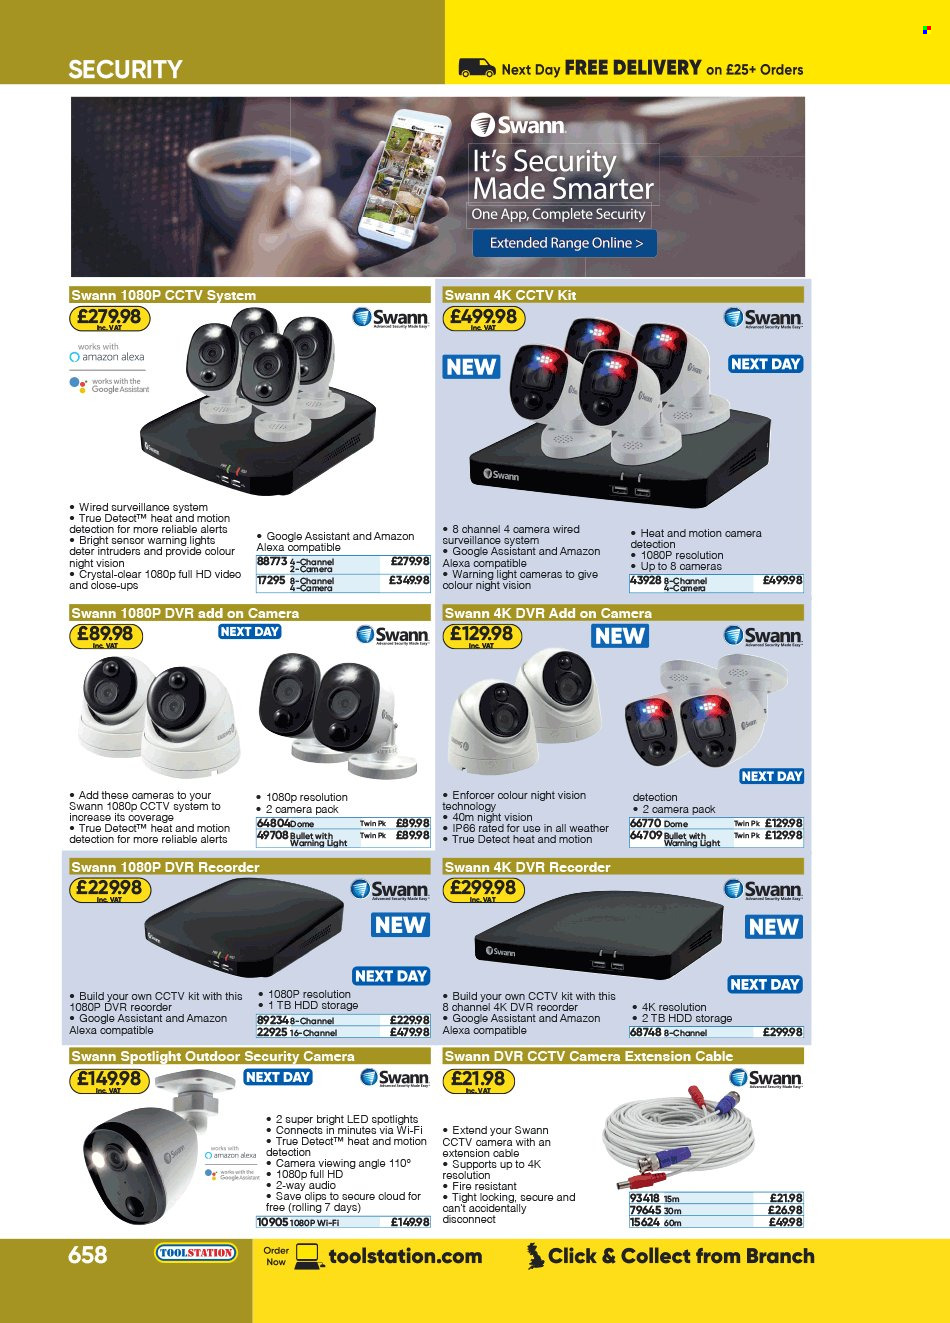 Toolstation offer . Page 658.